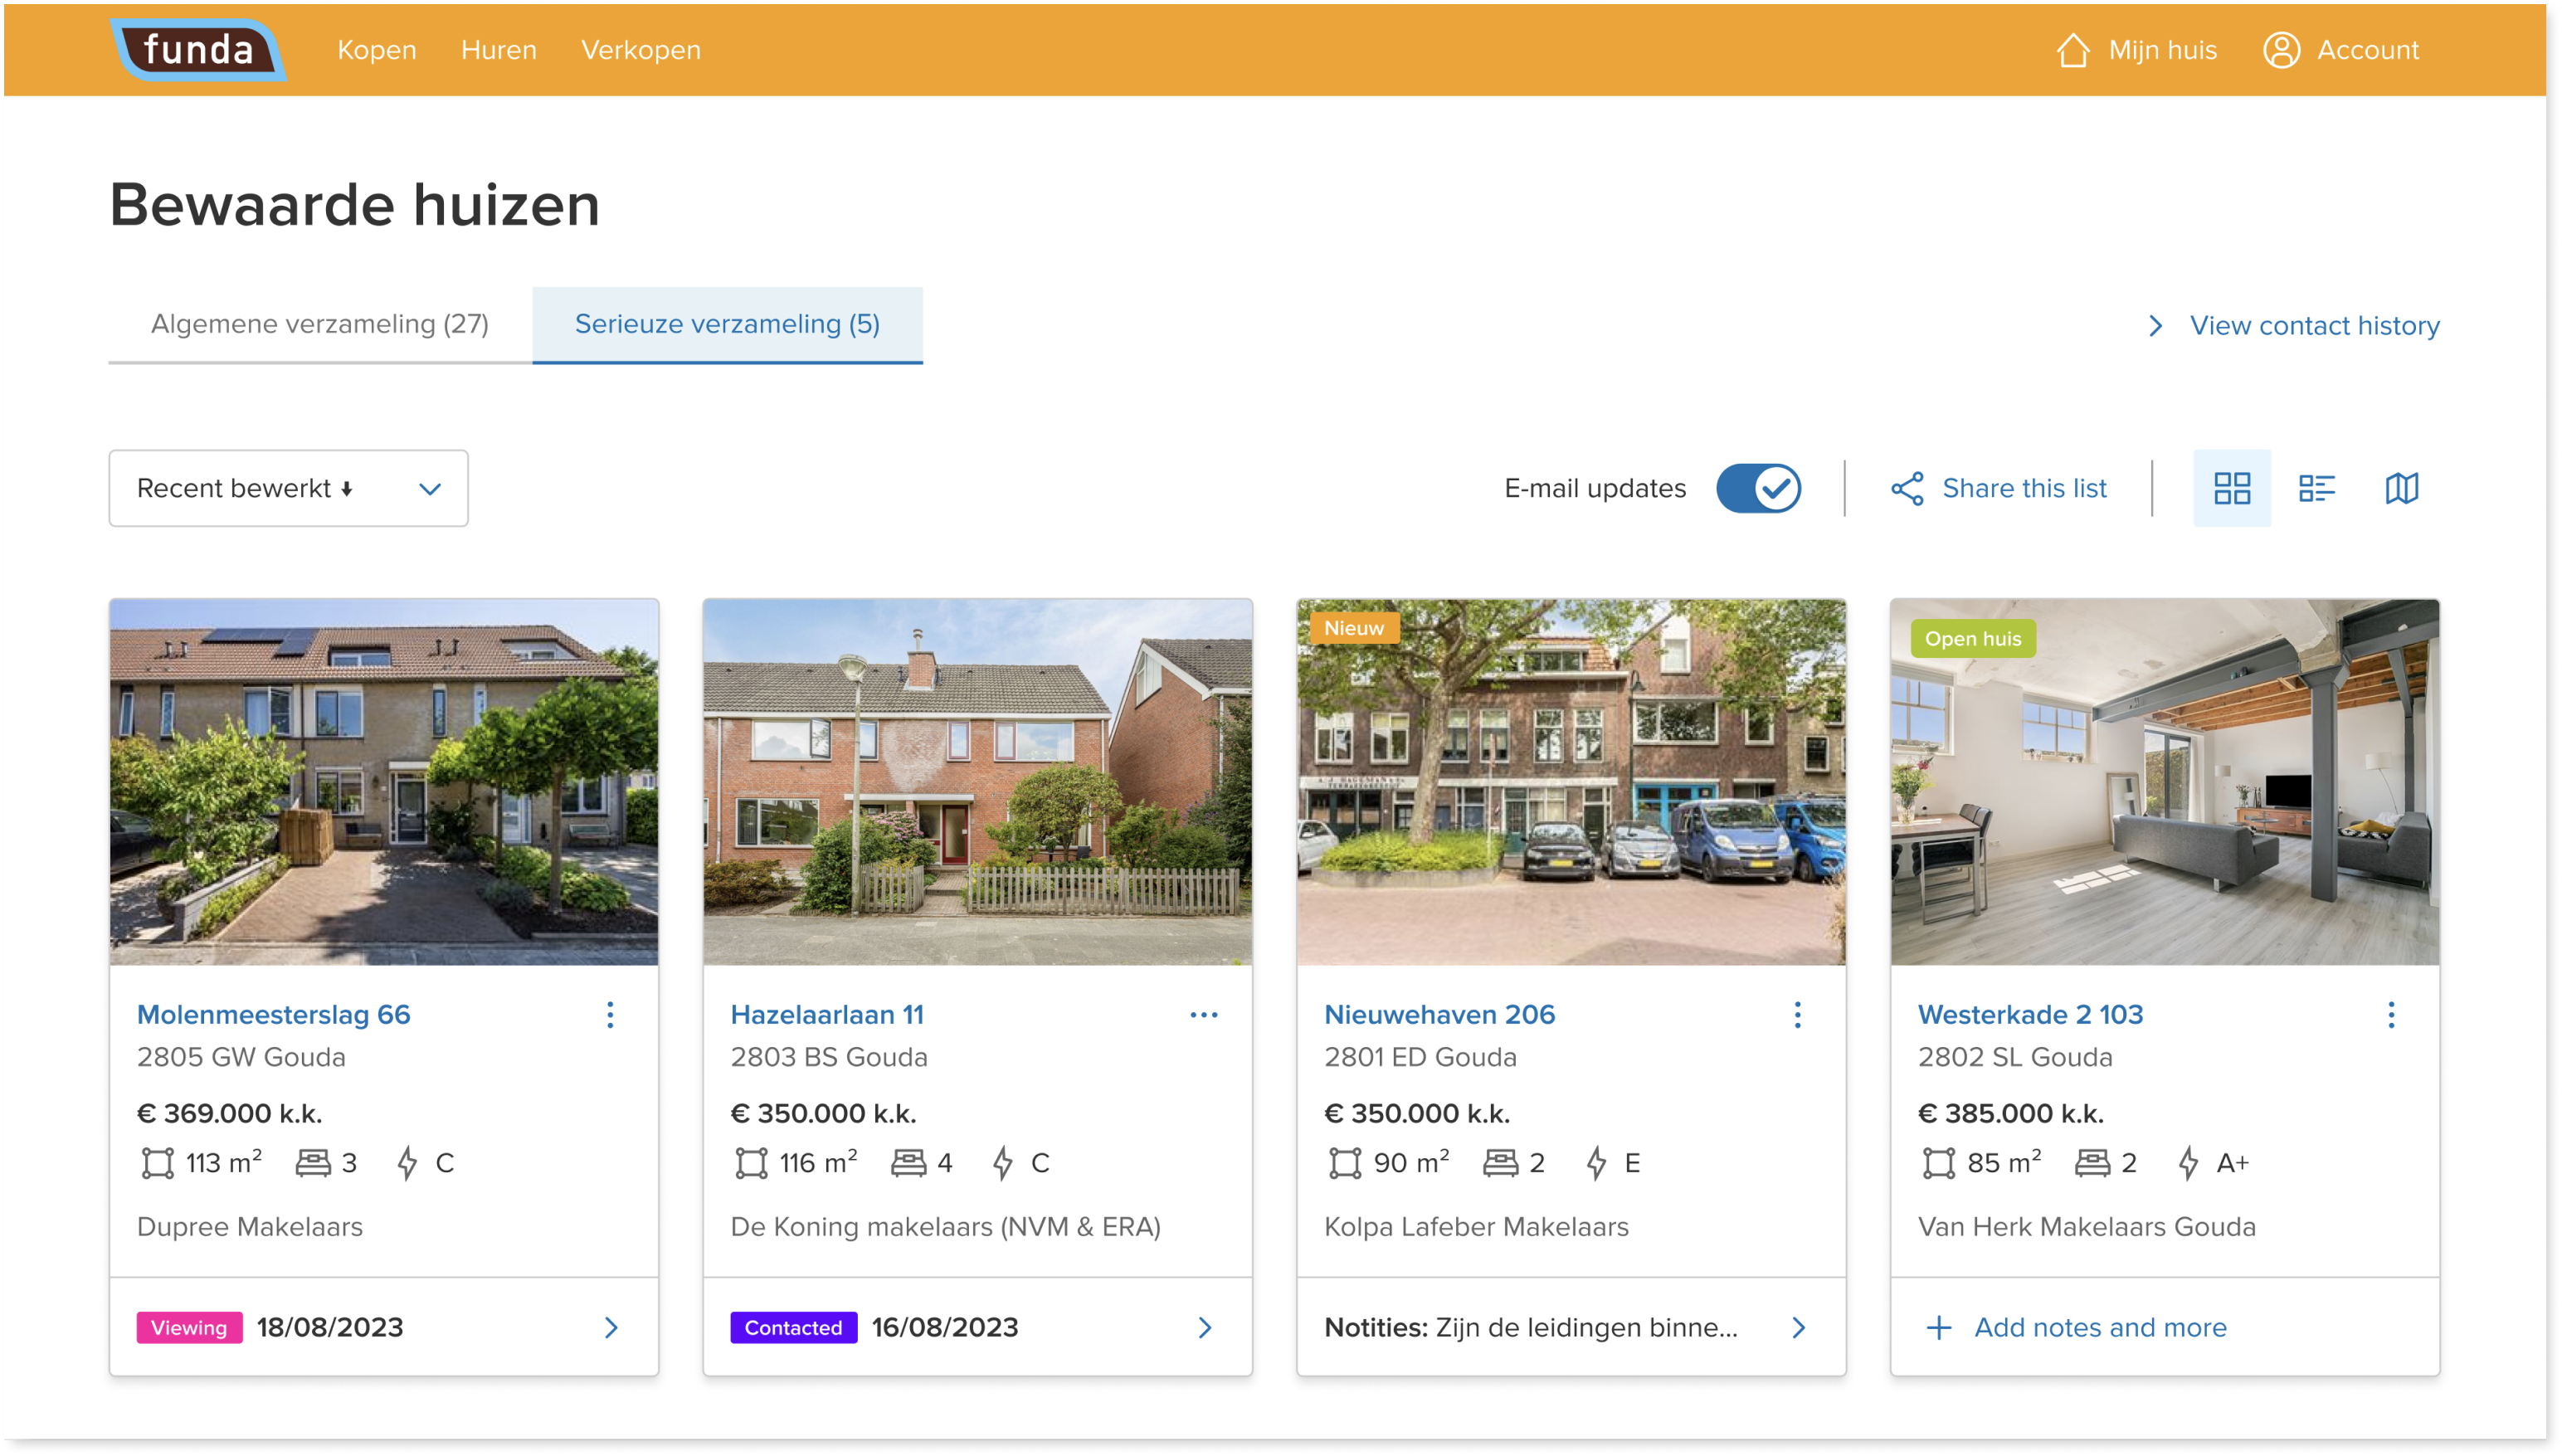 A bigger view of the improved design for the saved houses dashboard